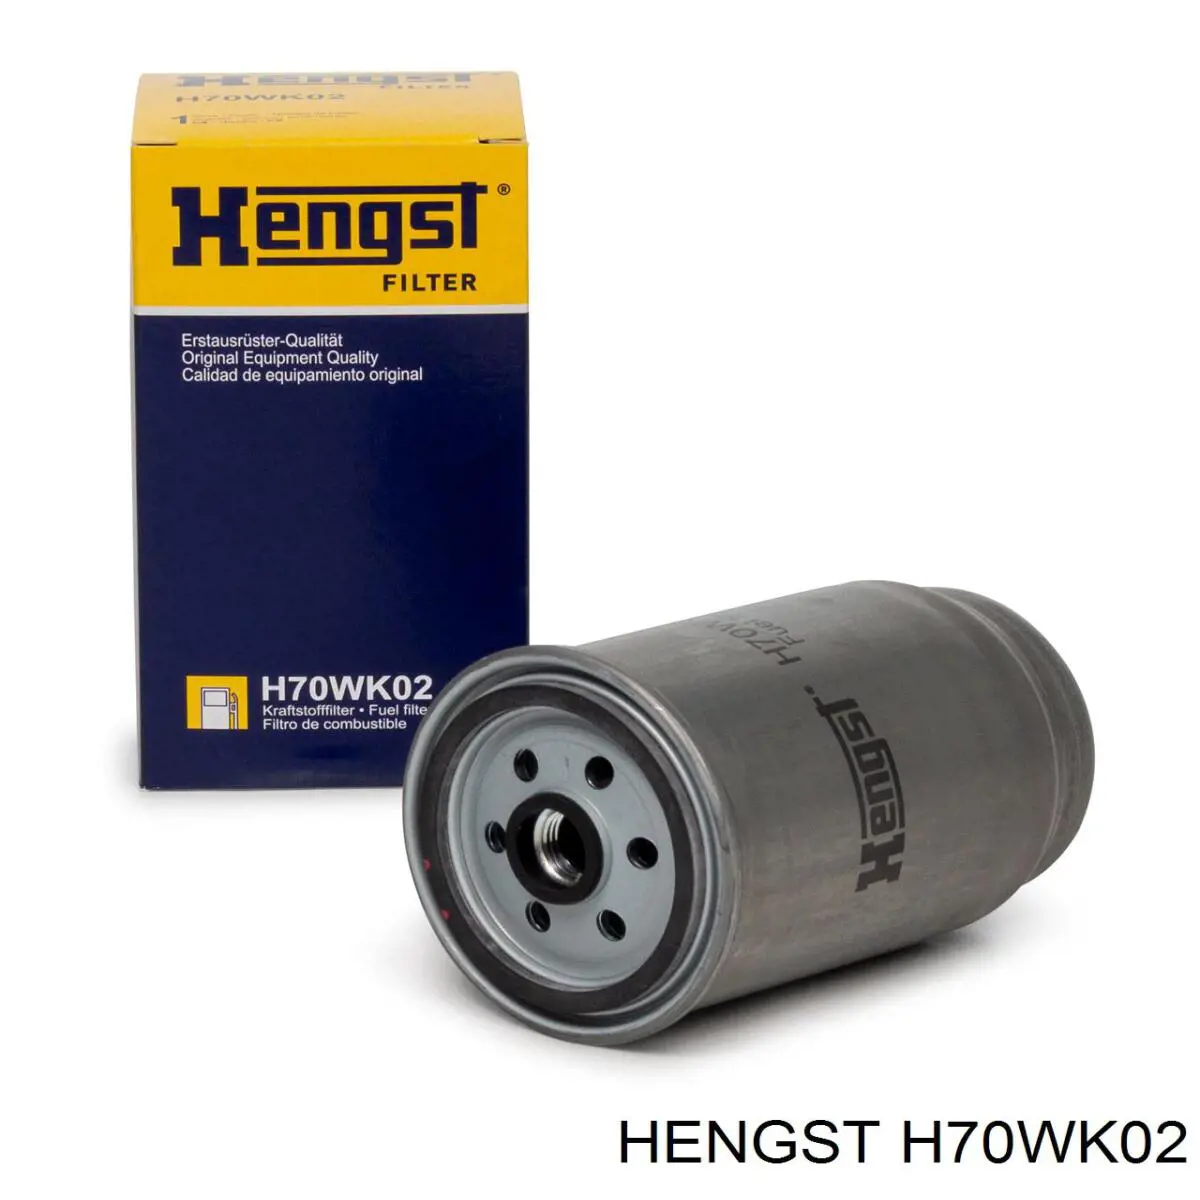 Filtro combustible H70WK02 Hengst